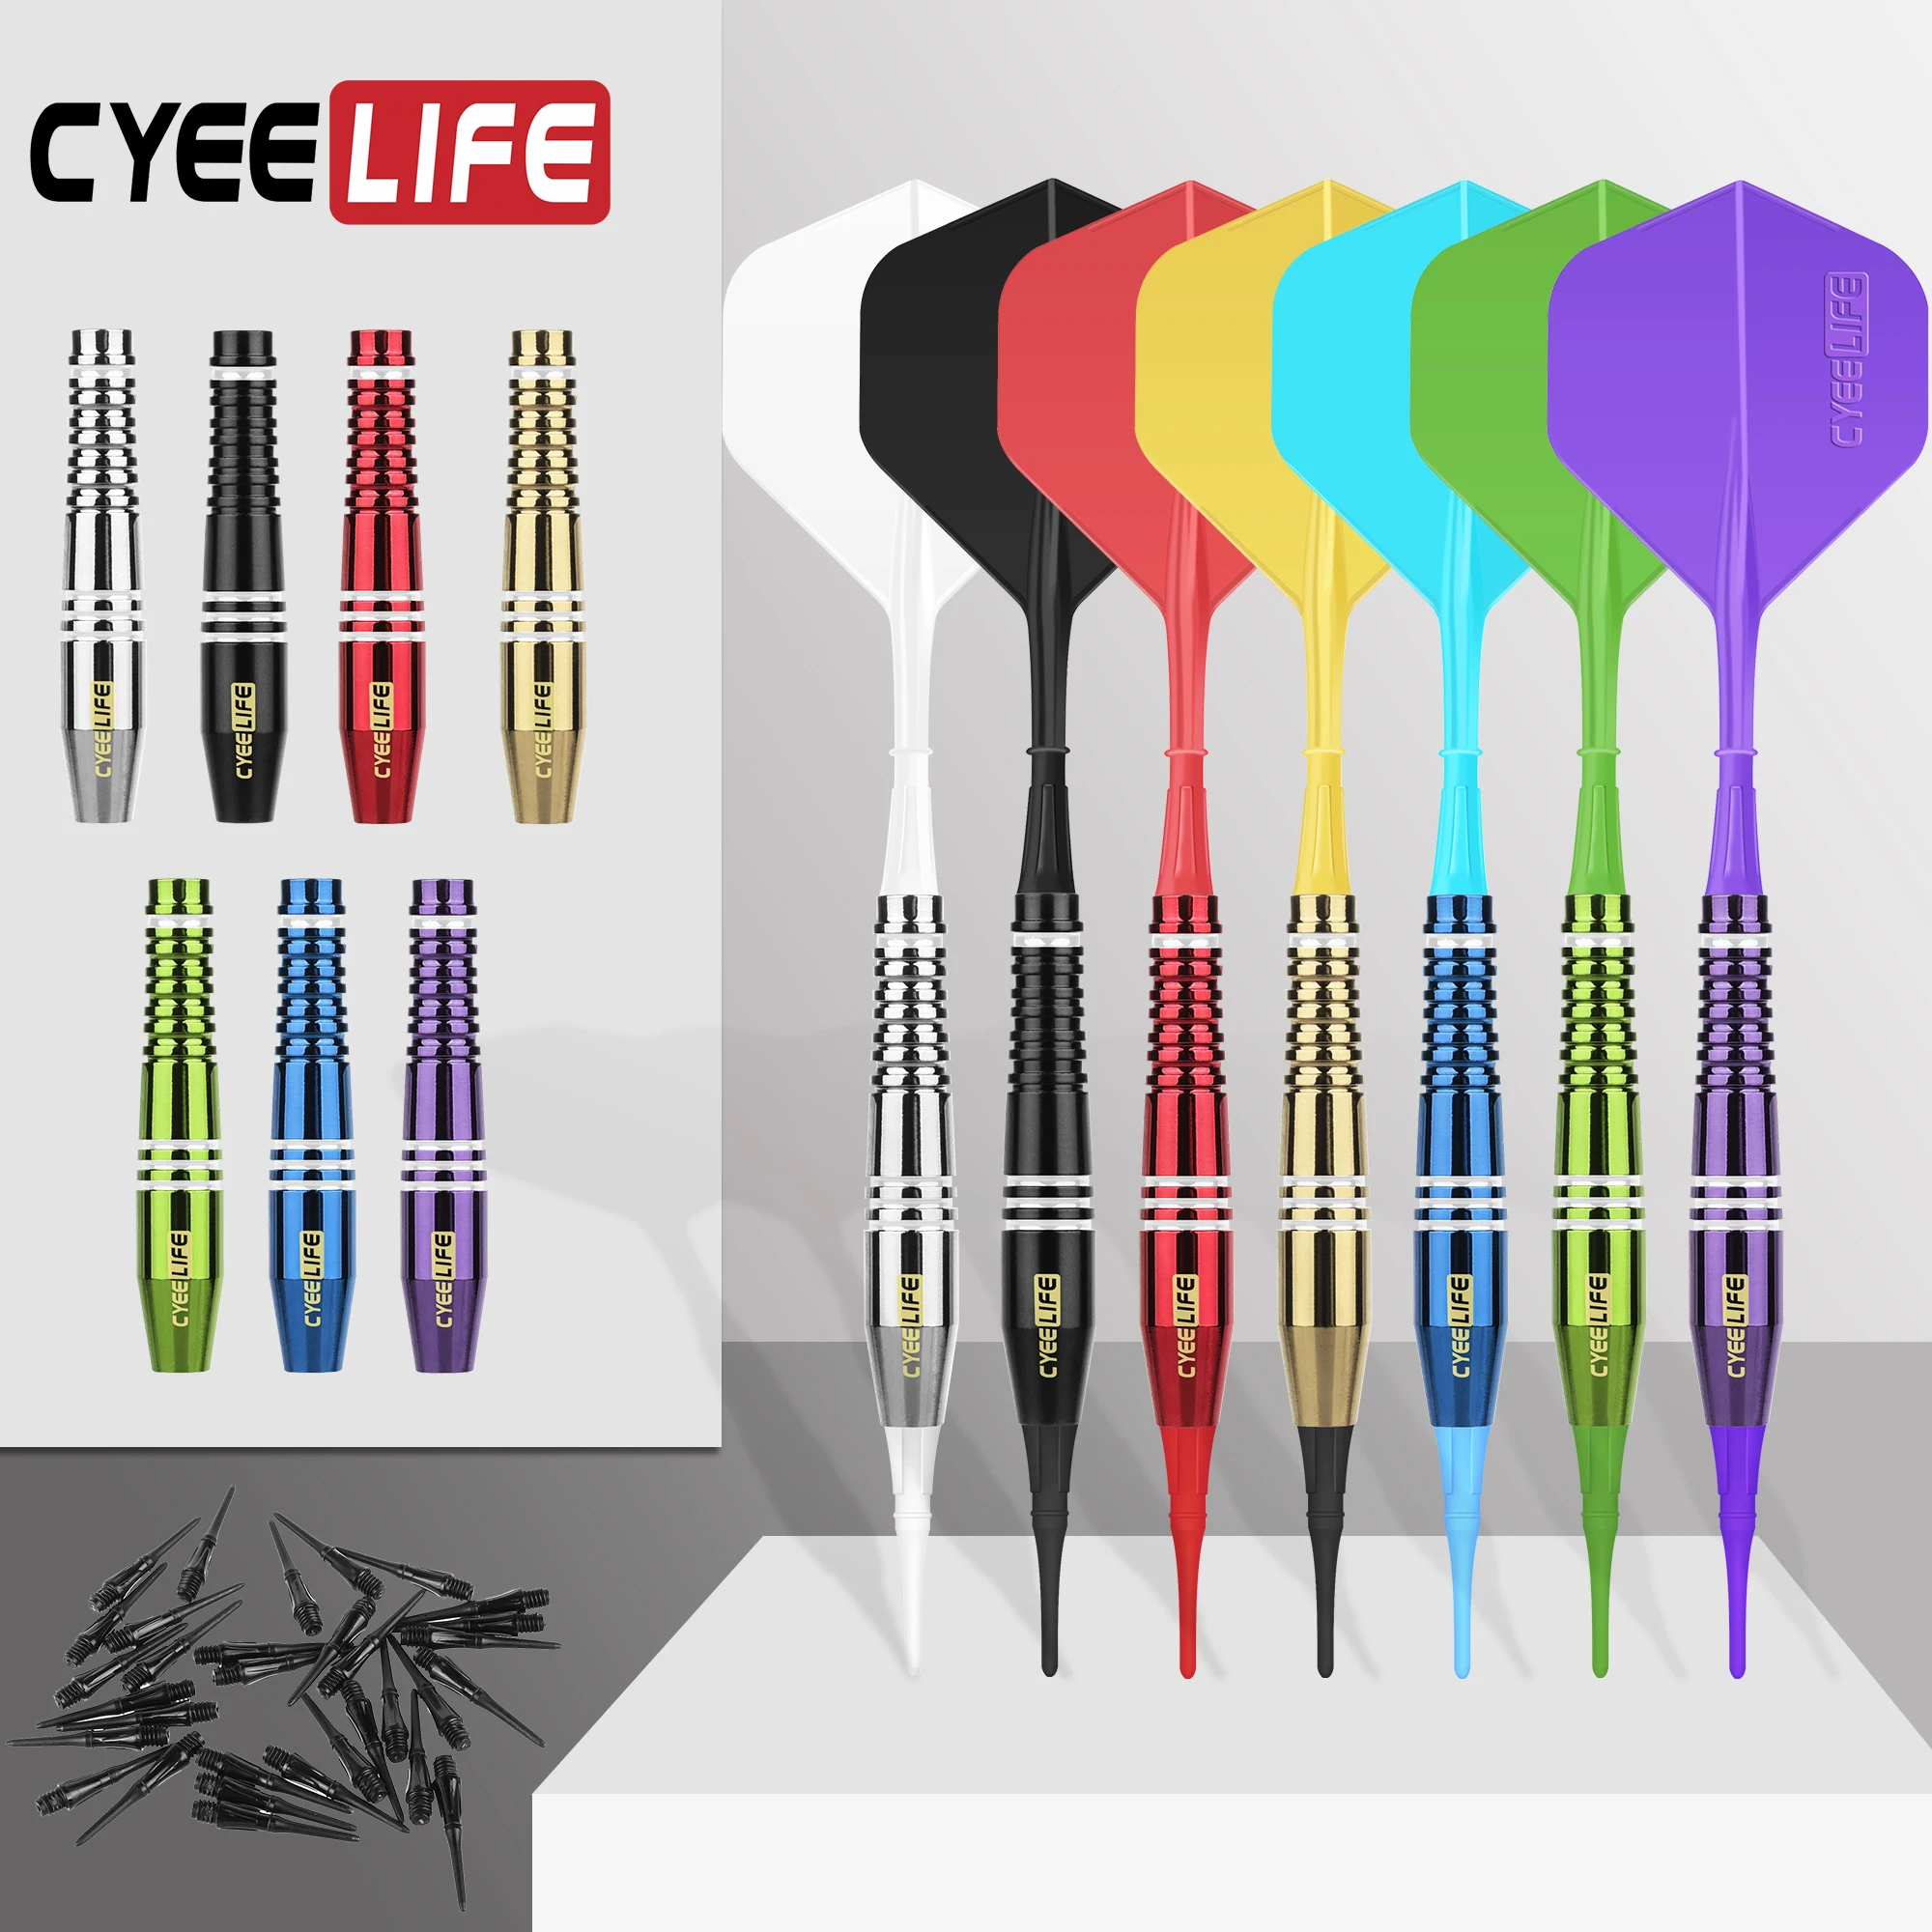 

CyeeLife 18g Brass Soft Tip Darts With Carry Case and Extra Plastic Points & Flights,Professional Electronic Dart set